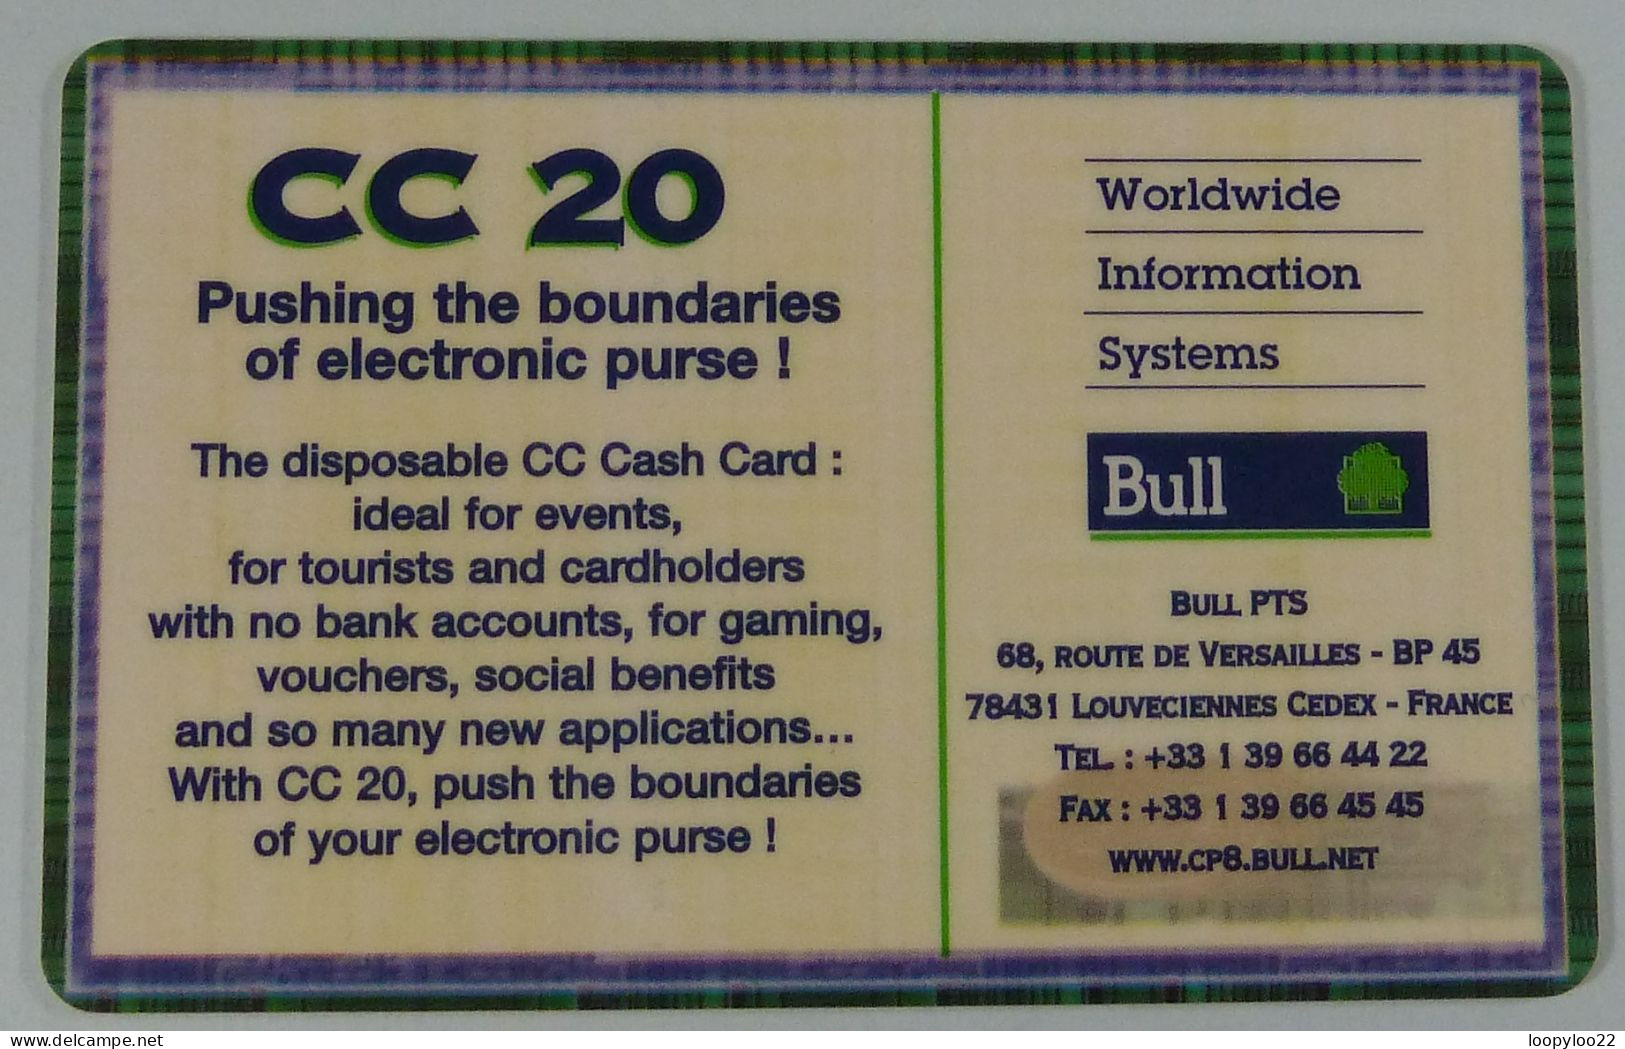 FRANCE - Bull Chip - CC20 - Electronic Purse Demo For Proton - Disposable Credit Card